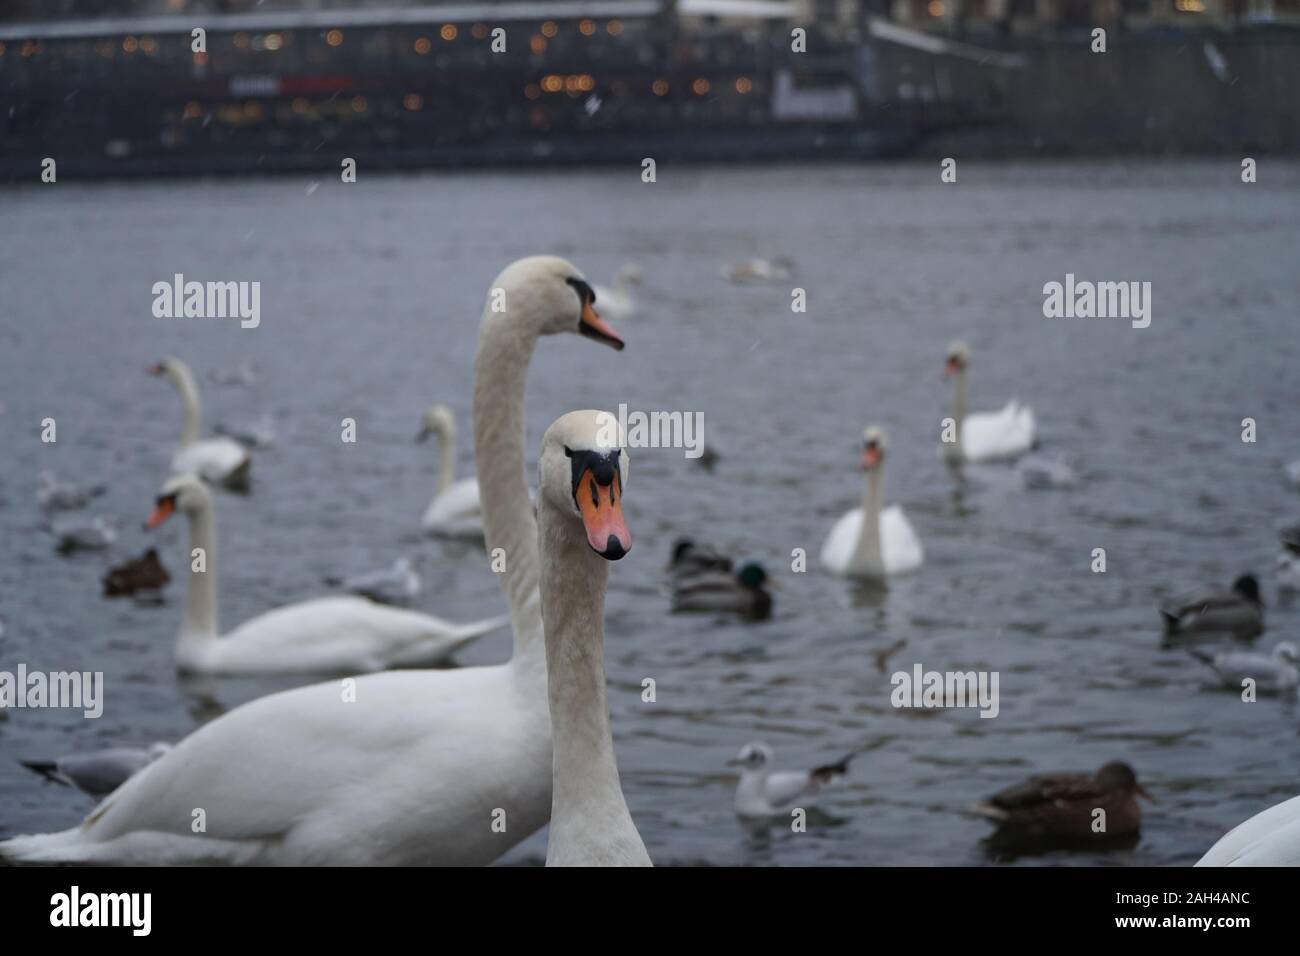 Prague, Czech Republic 2019: Swans on the banks of the Moldava river in Prague during a snowfall Stock Photo